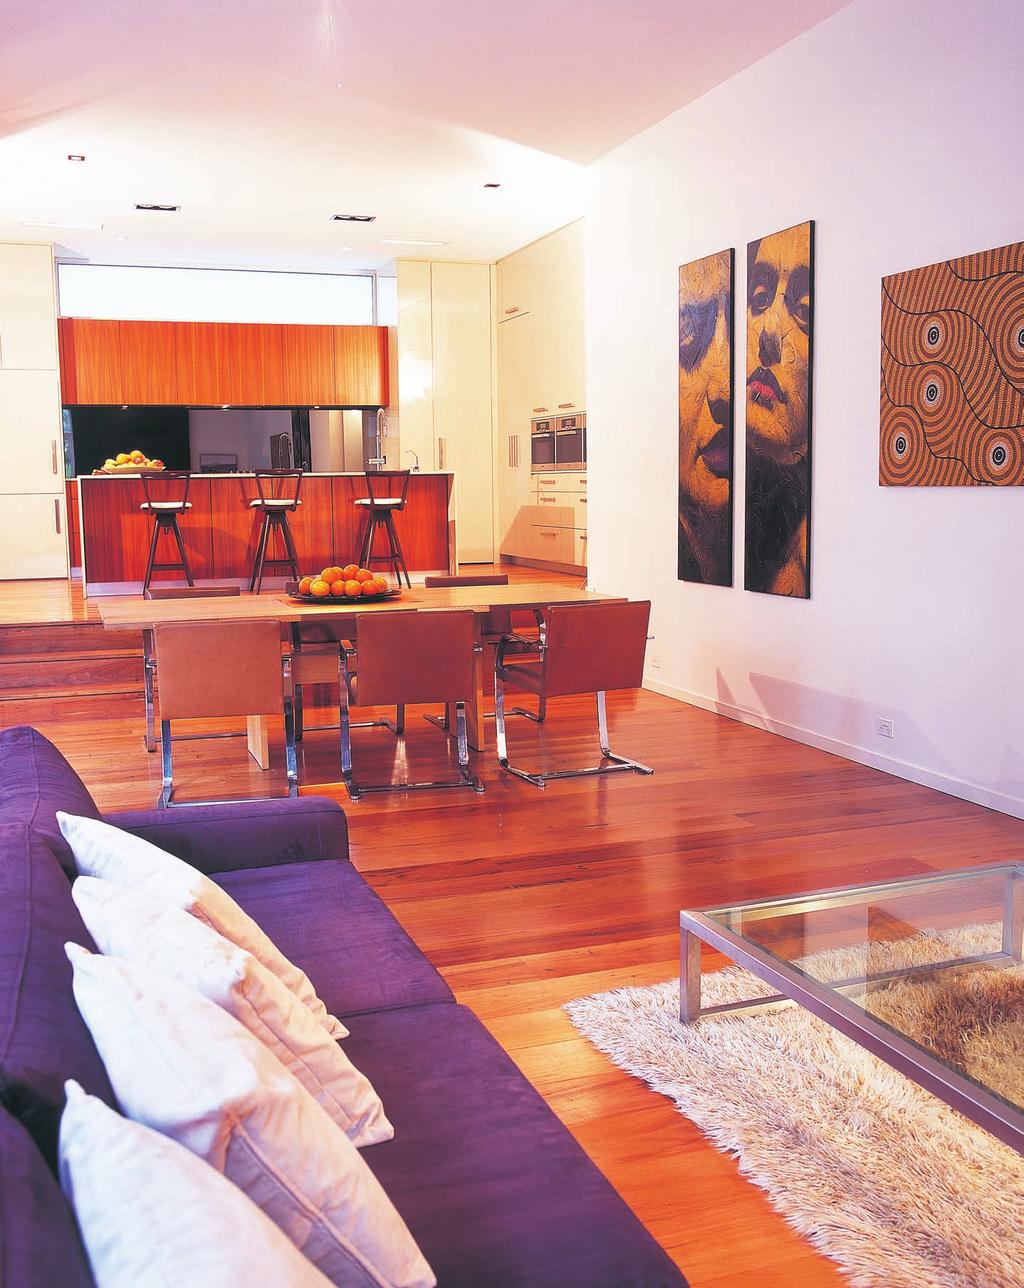 THIS PAGE: Alpine stringy bark flooring was sourced for its rich tones, which are reflected in